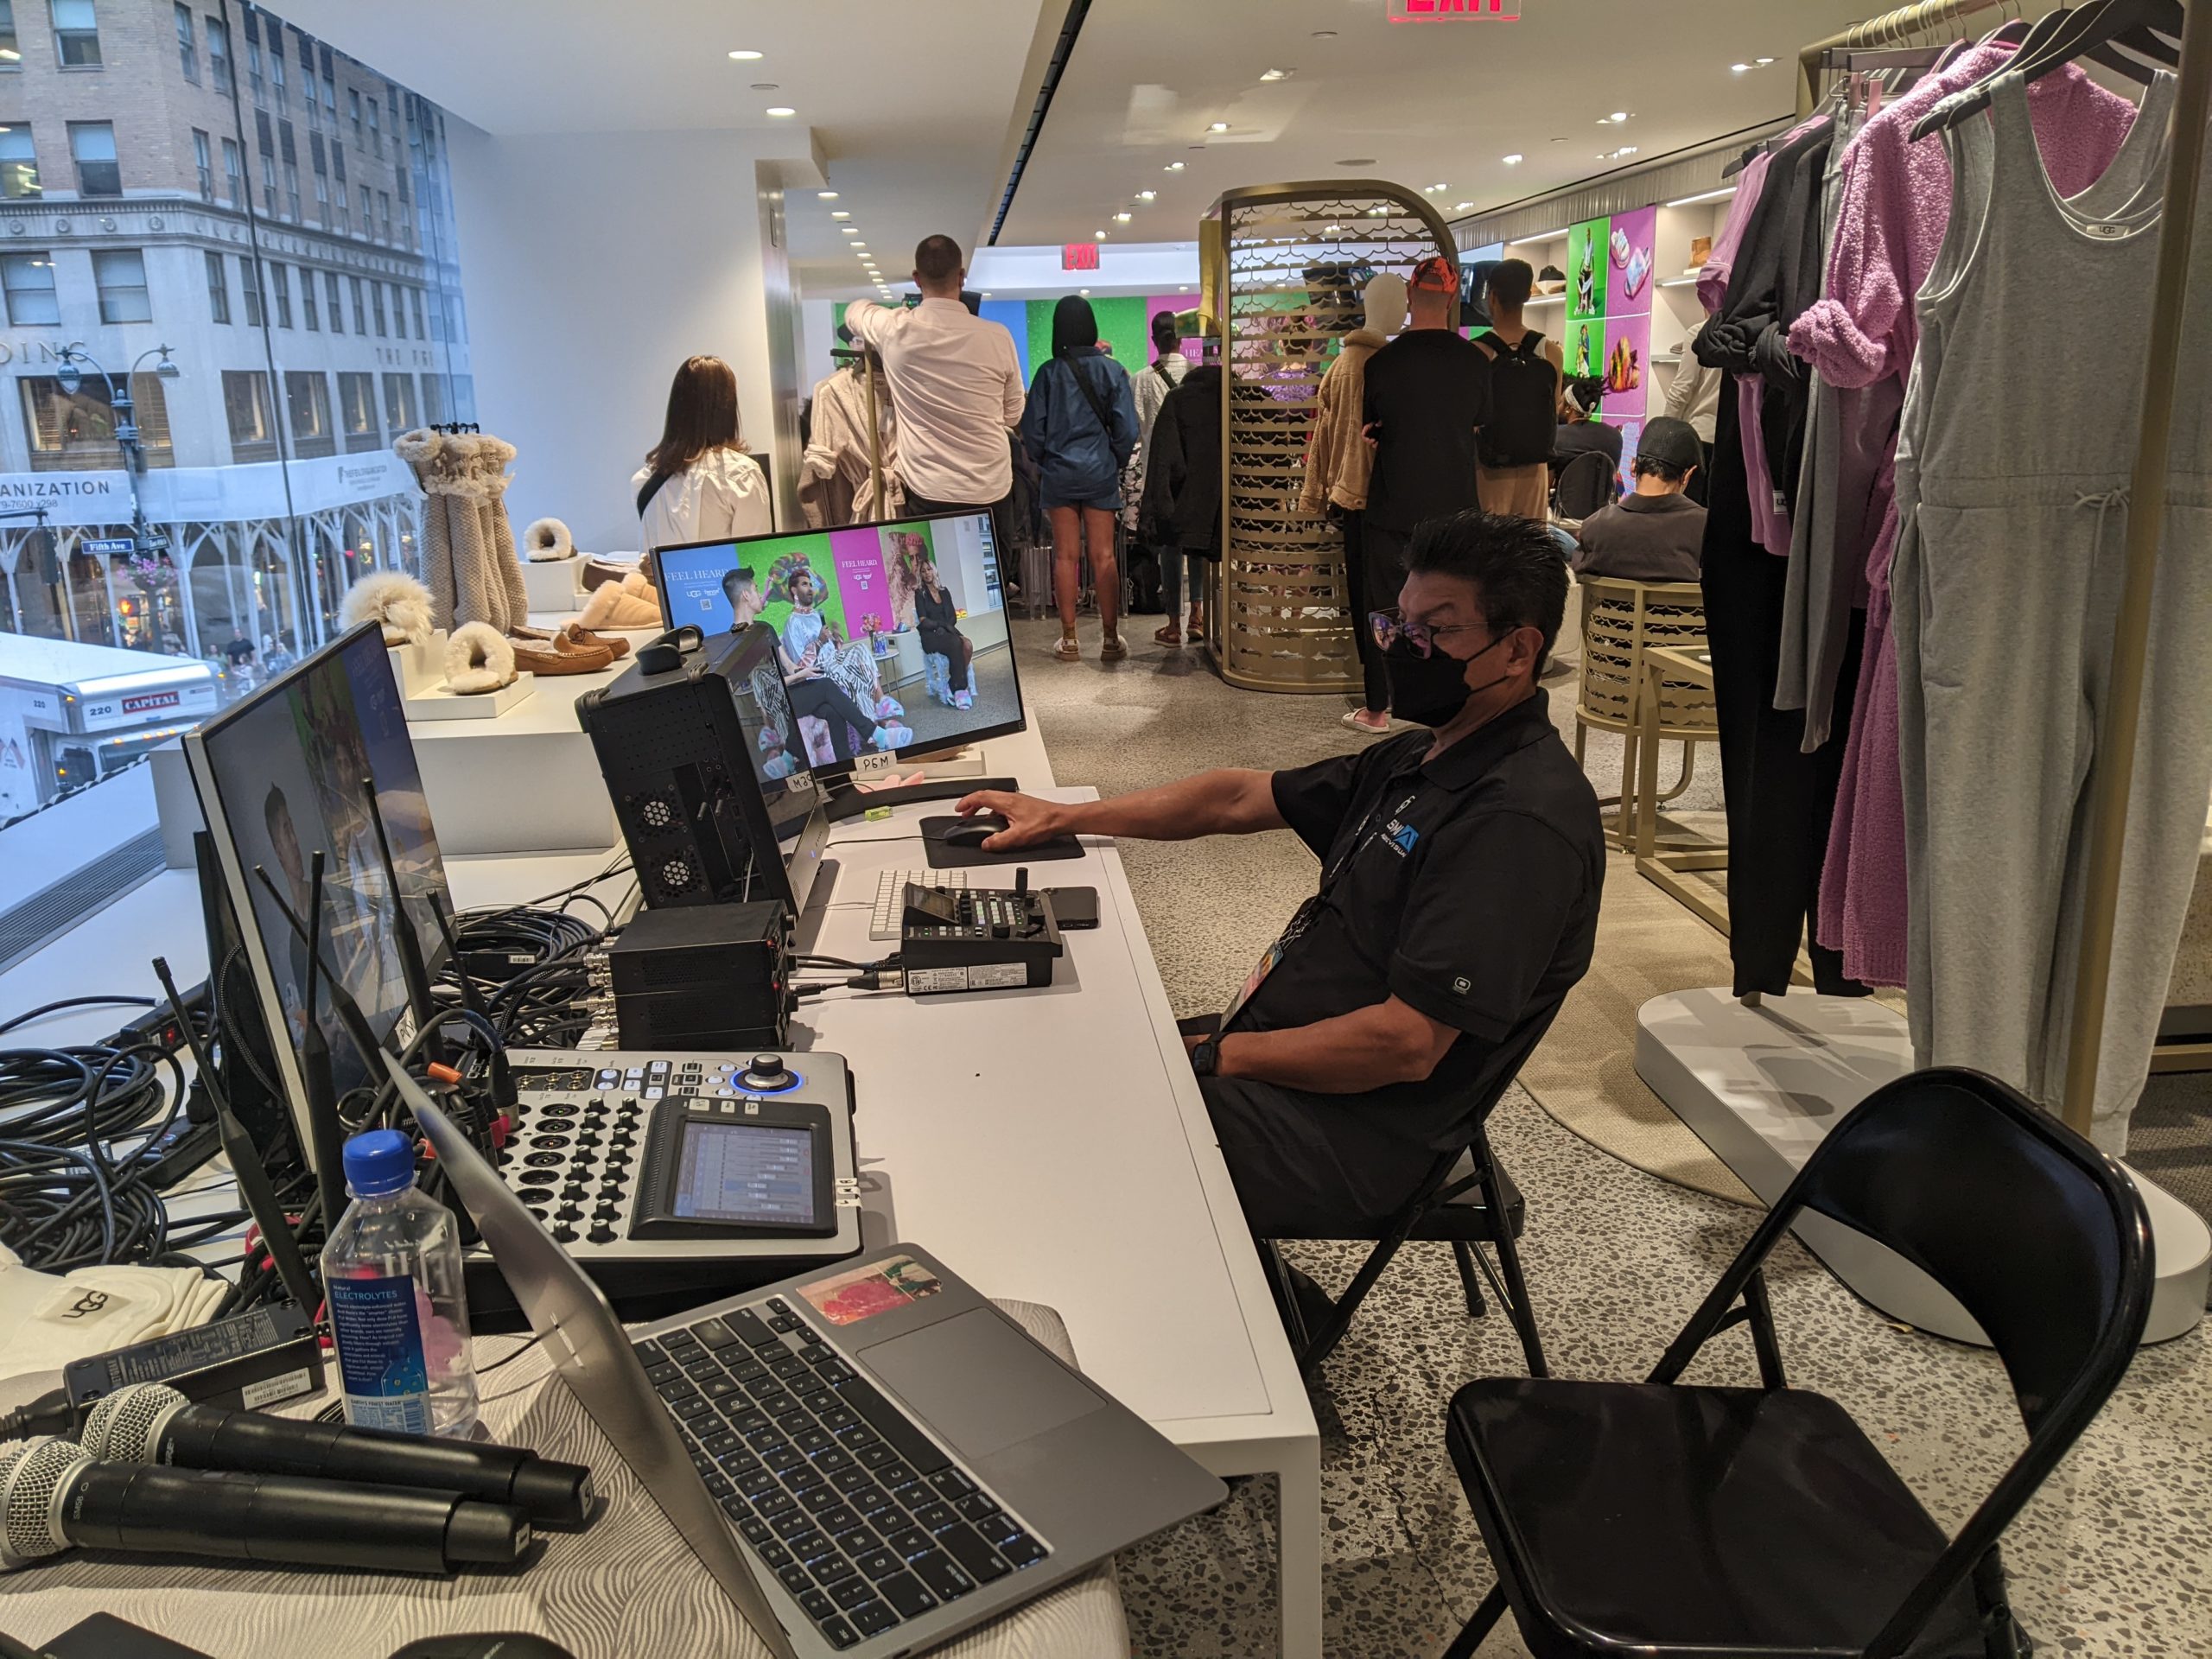 Hybrid events being held at a retail clothing store on a busy street